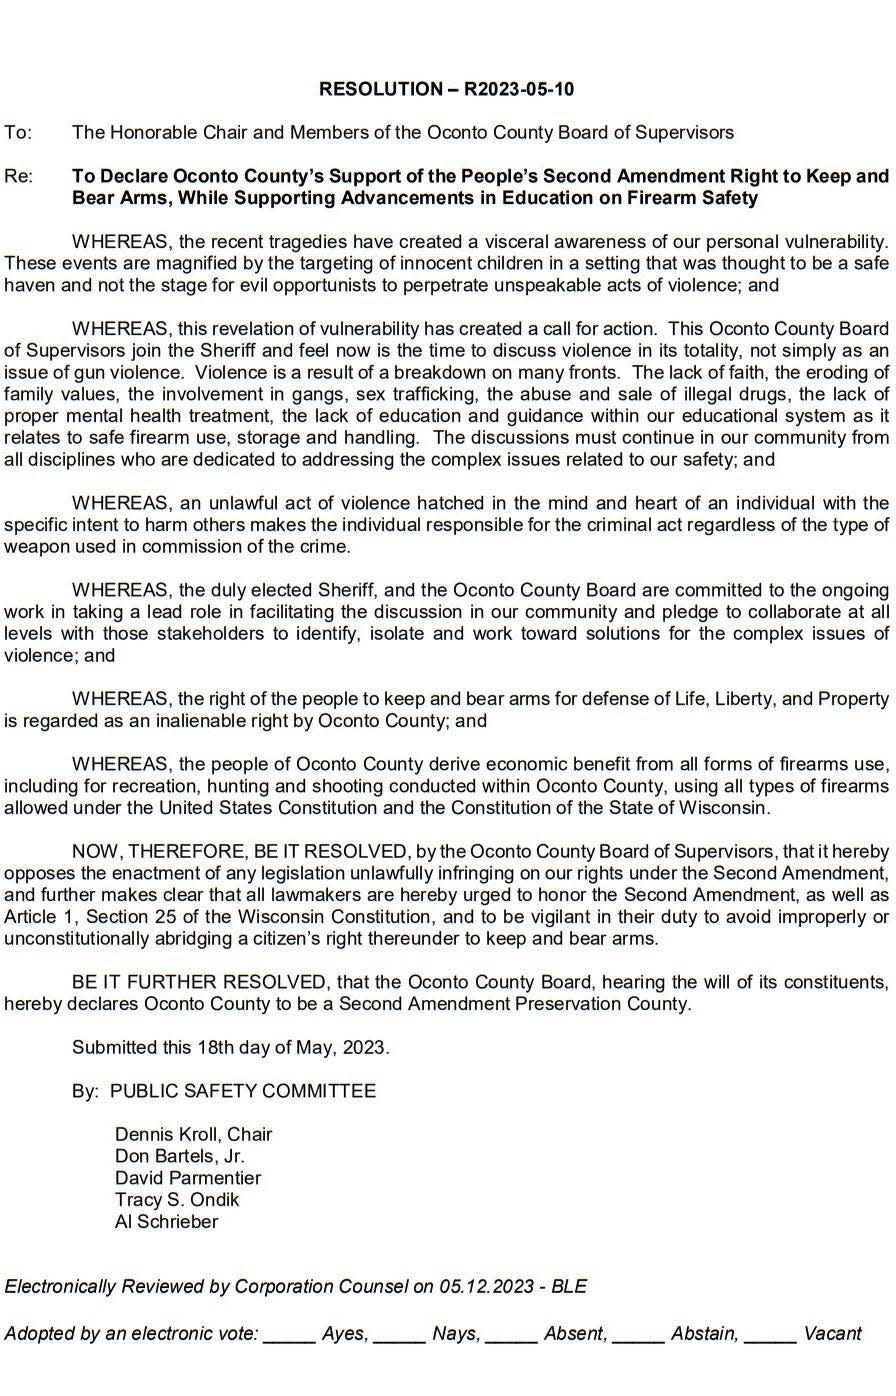 Text of the proposed resolution to make Oconto County a "Second Amendment Preservation County."